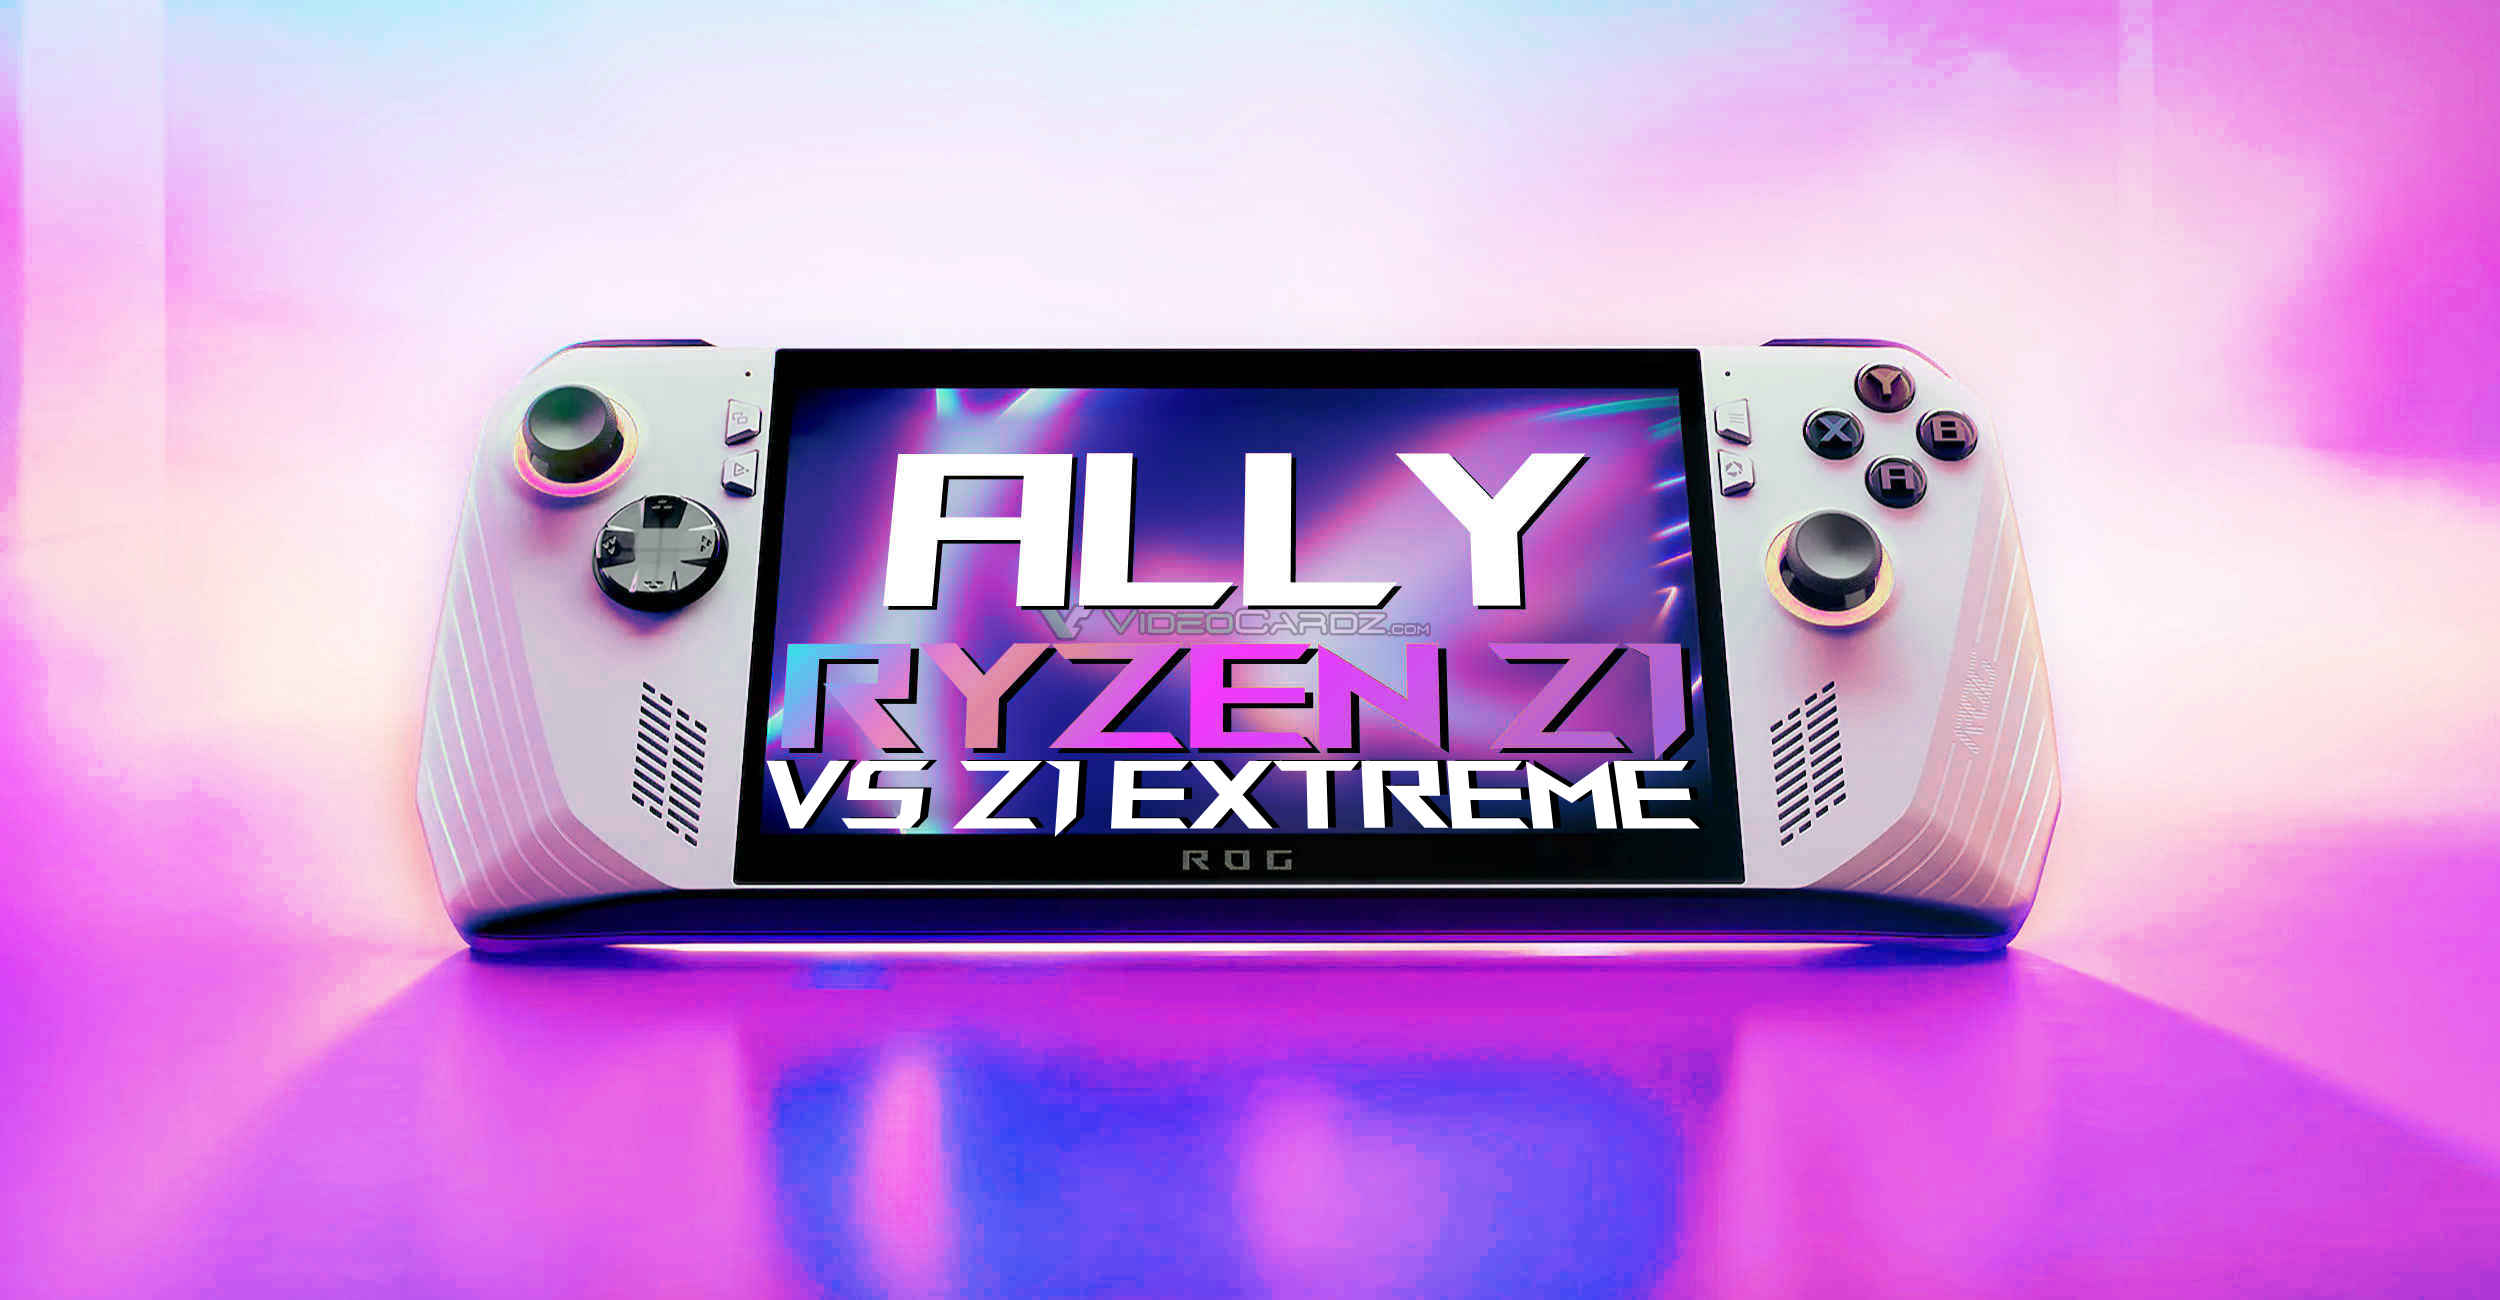 ASUS ROG Ally handheld with Ryzen Z1 Extreme is 30% (720p) to 37% (1080p)  faster in gaming than Z1 non-Extreme 